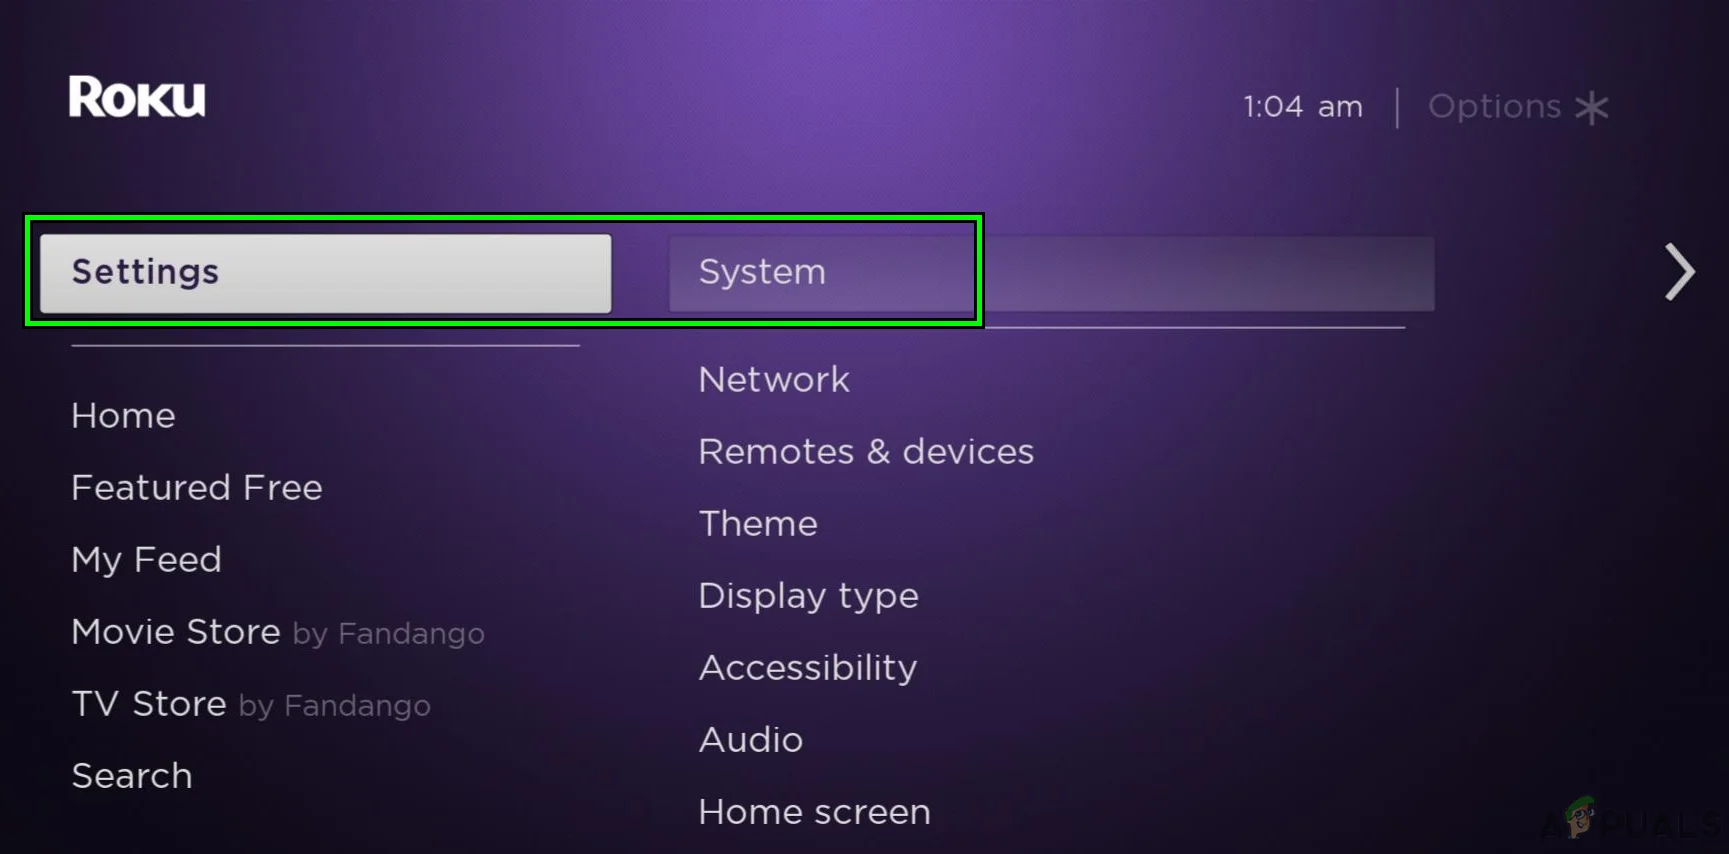 Open System in the Roku Device Settings